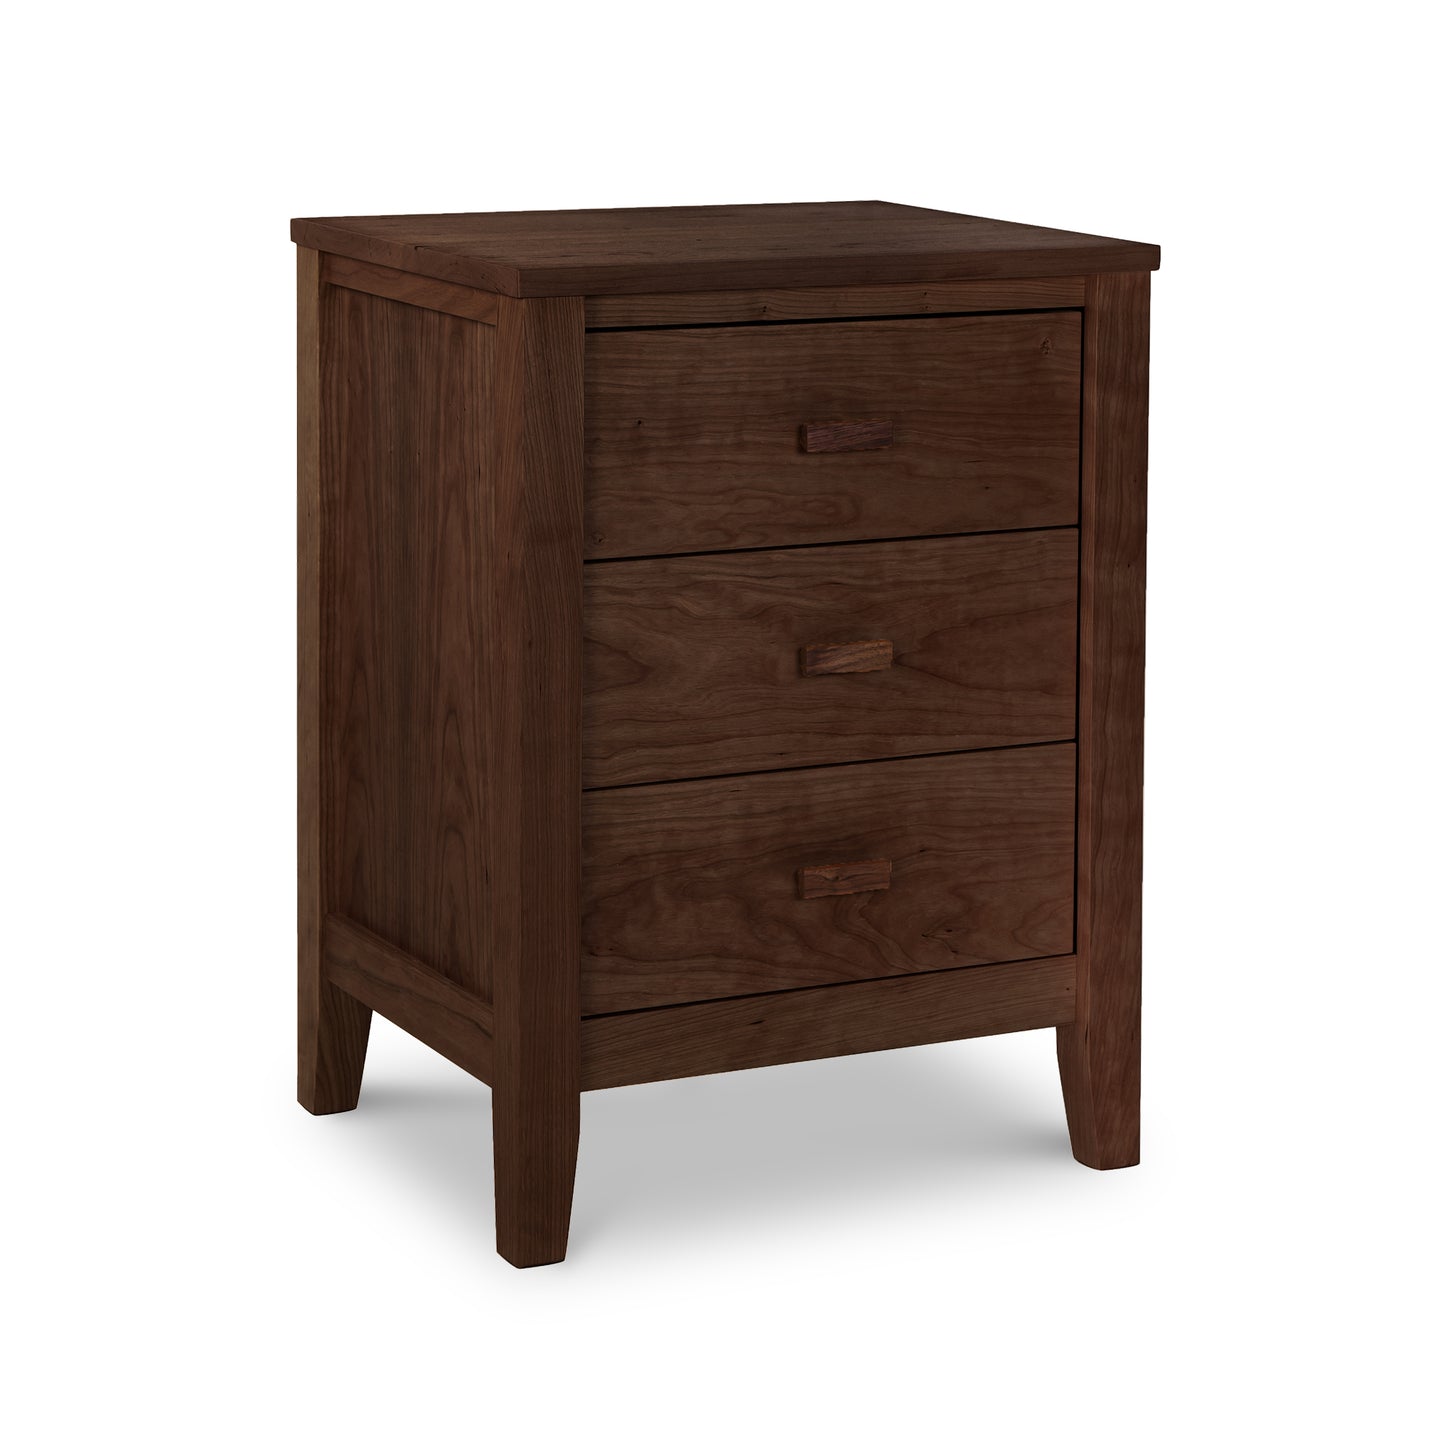 A Maple Corner Woodworks Andover Modern 3-Drawer Nightstand with three drawers providing ample storage on a white background.